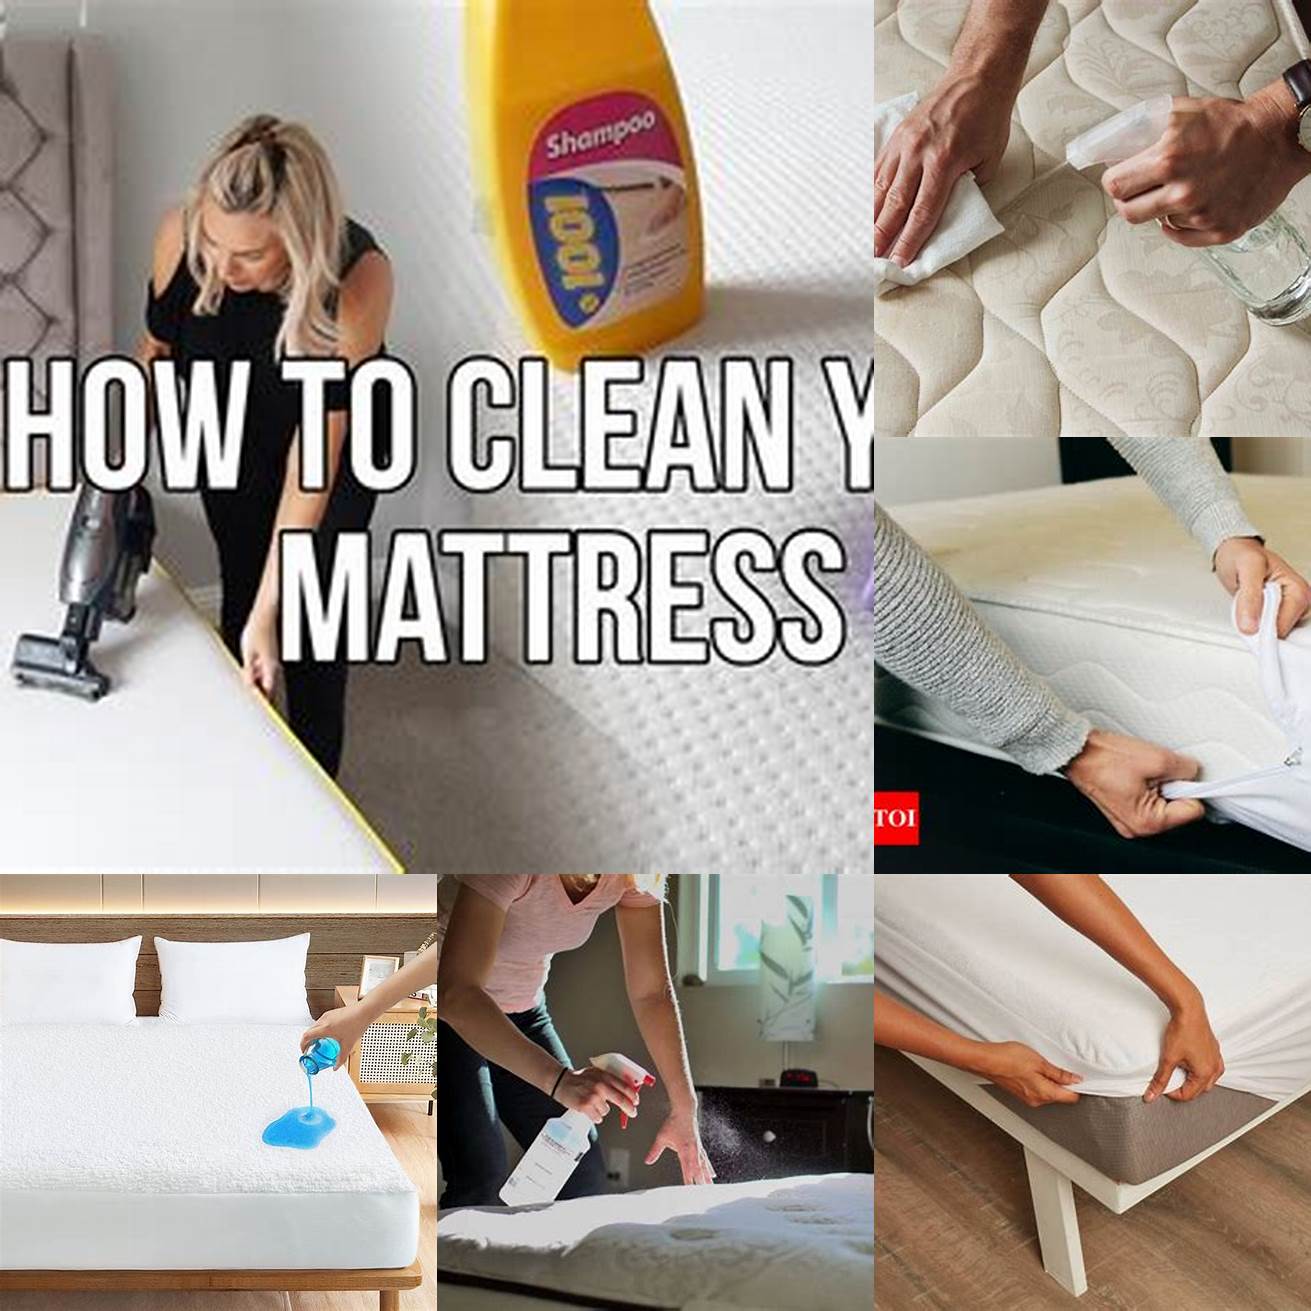 Use a mattress protector to keep your bed clean and free of stains